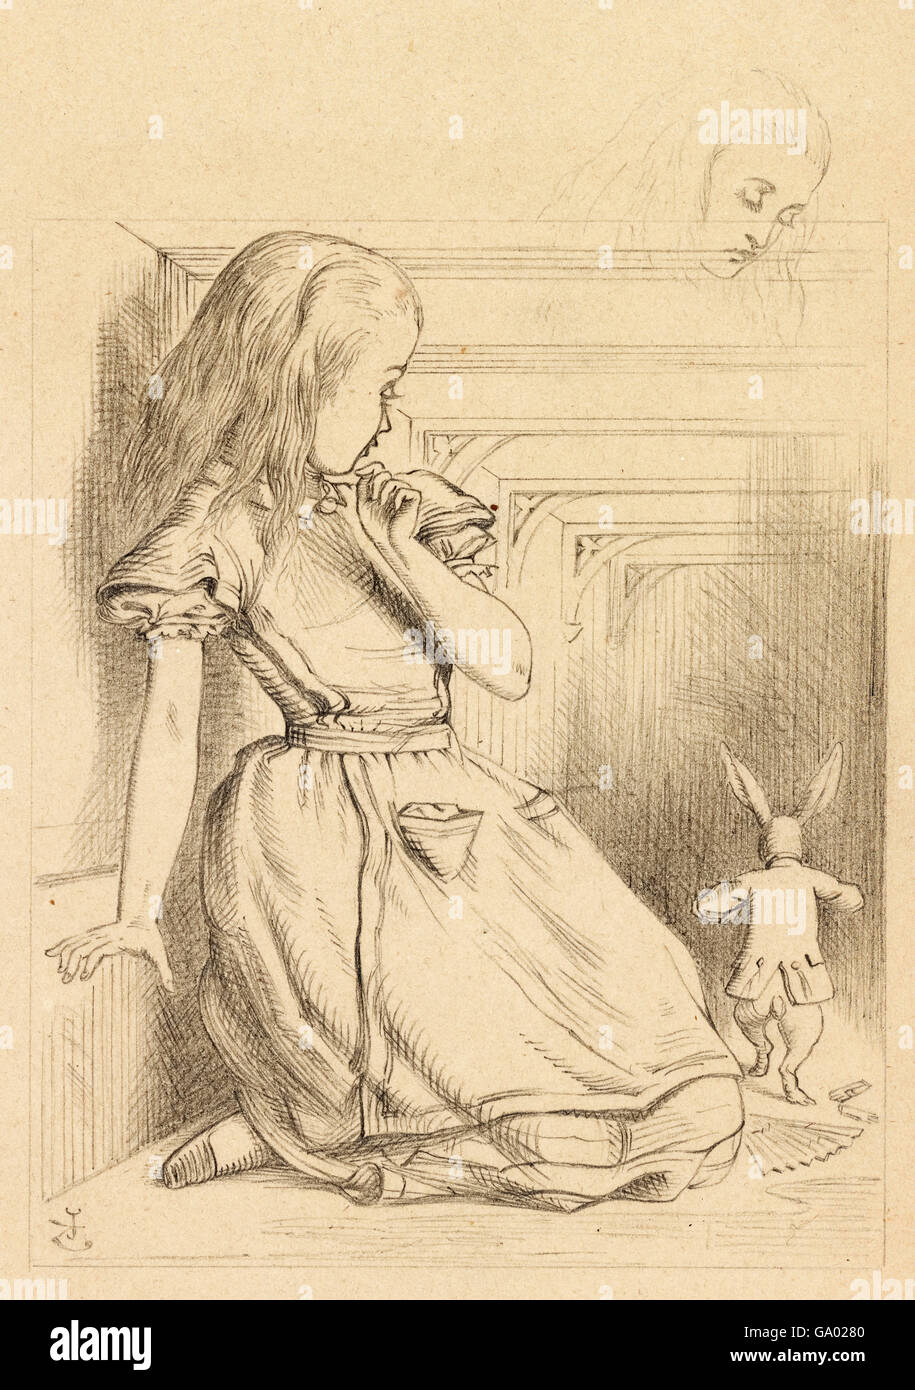 Alice in Wonderland. 'The Rabbit Scurried', an illustration by Sir John Tenniel for Lewis Carroll's 'Alice in Wonderland', showing Alice and the White Rabbit. Pencil drawing on paper, c.1866. Stock Photo